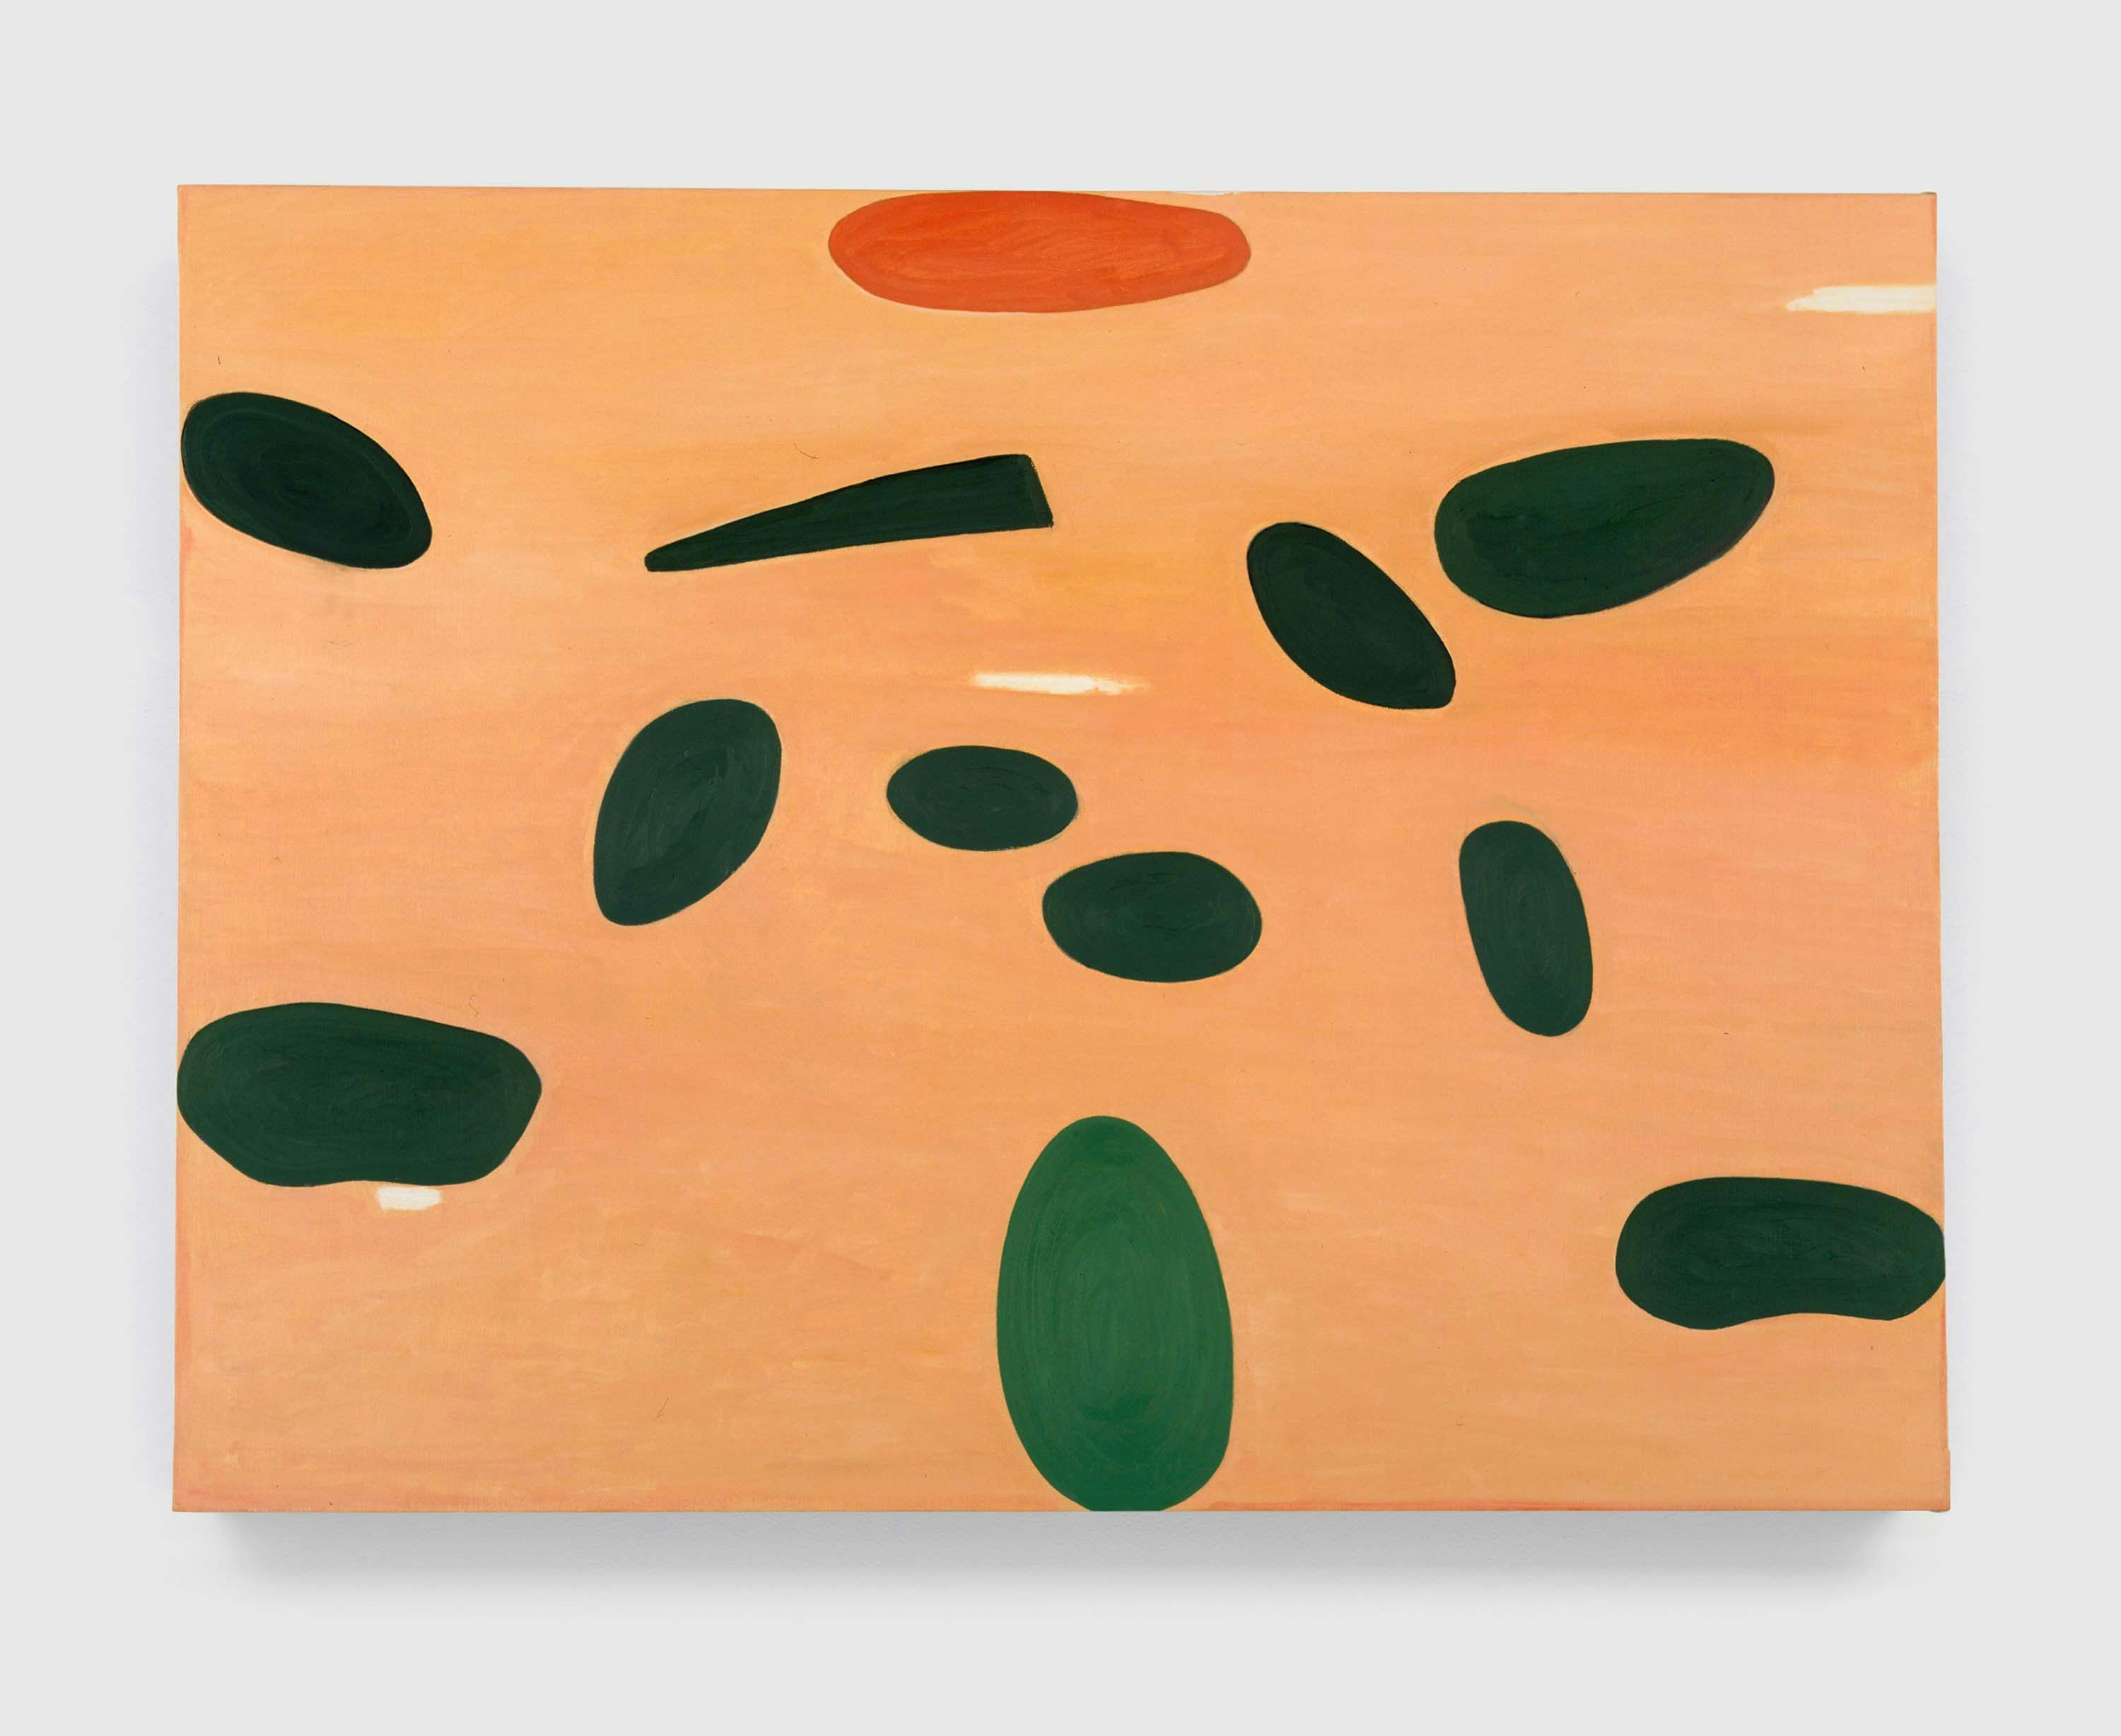 A painting by Raoul De Keyser, titled Come on, play it again nr. 3, dated 2001.